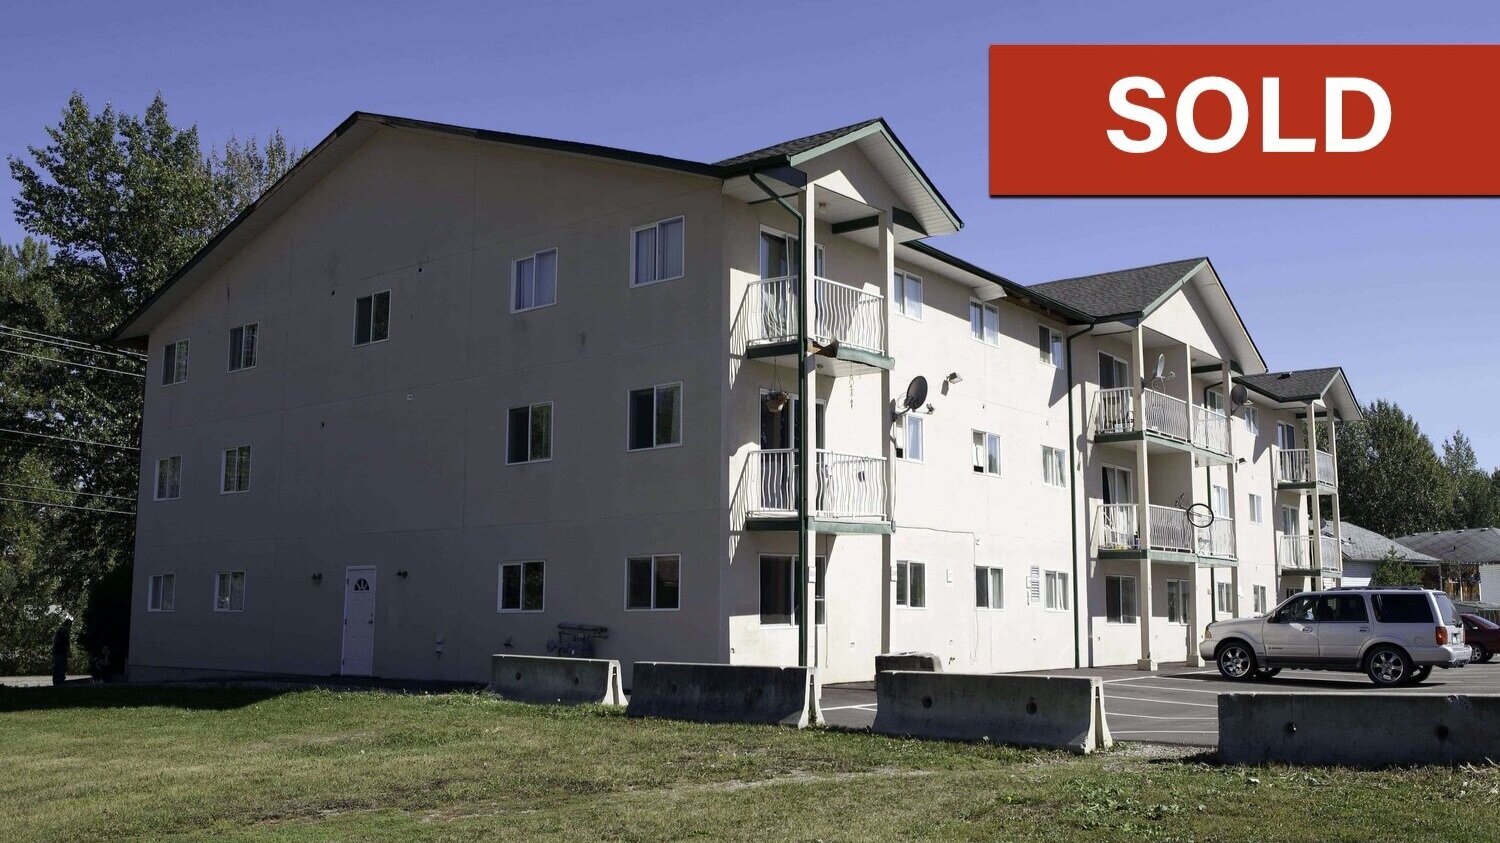 309-lewis-dr-quesnel-sold-building-parking-lot-and-balconies.jpg